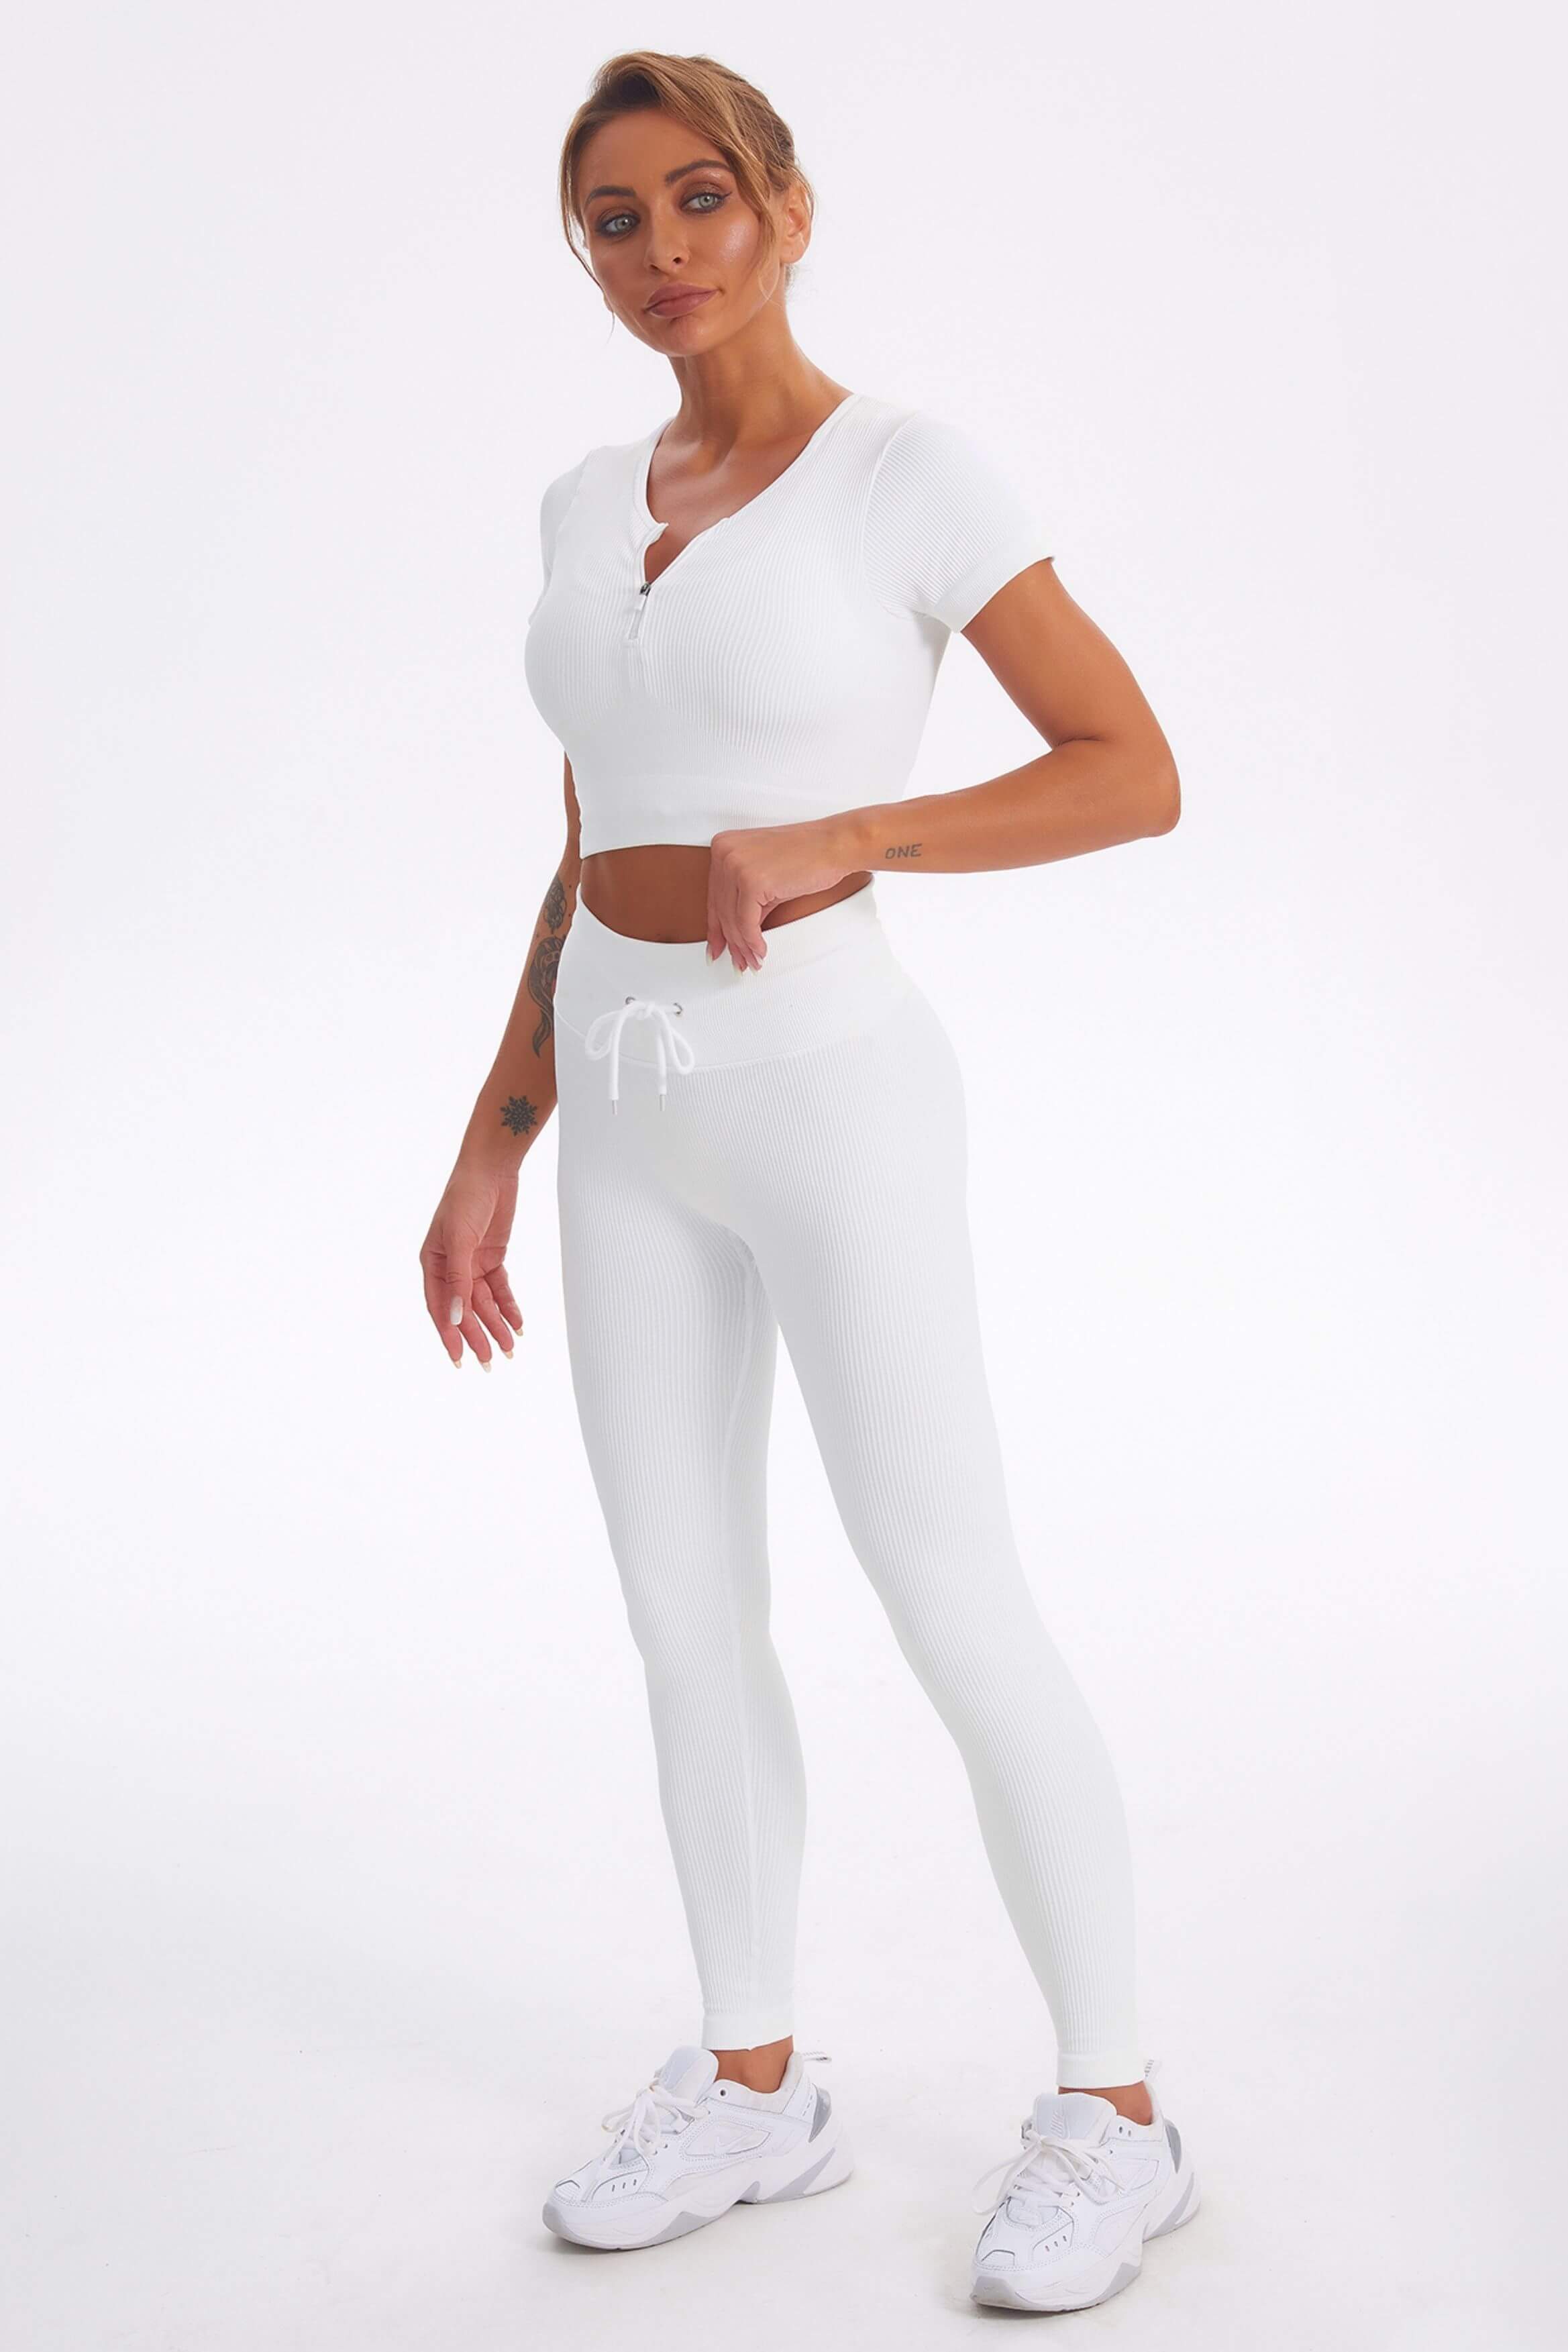 White Rib Seamless Beige Yoga Set For Women And Girls Athletic Fitness Suit  For Gym And Workout Sport Femme Activewear Set 230818 From Diao09, $18.1